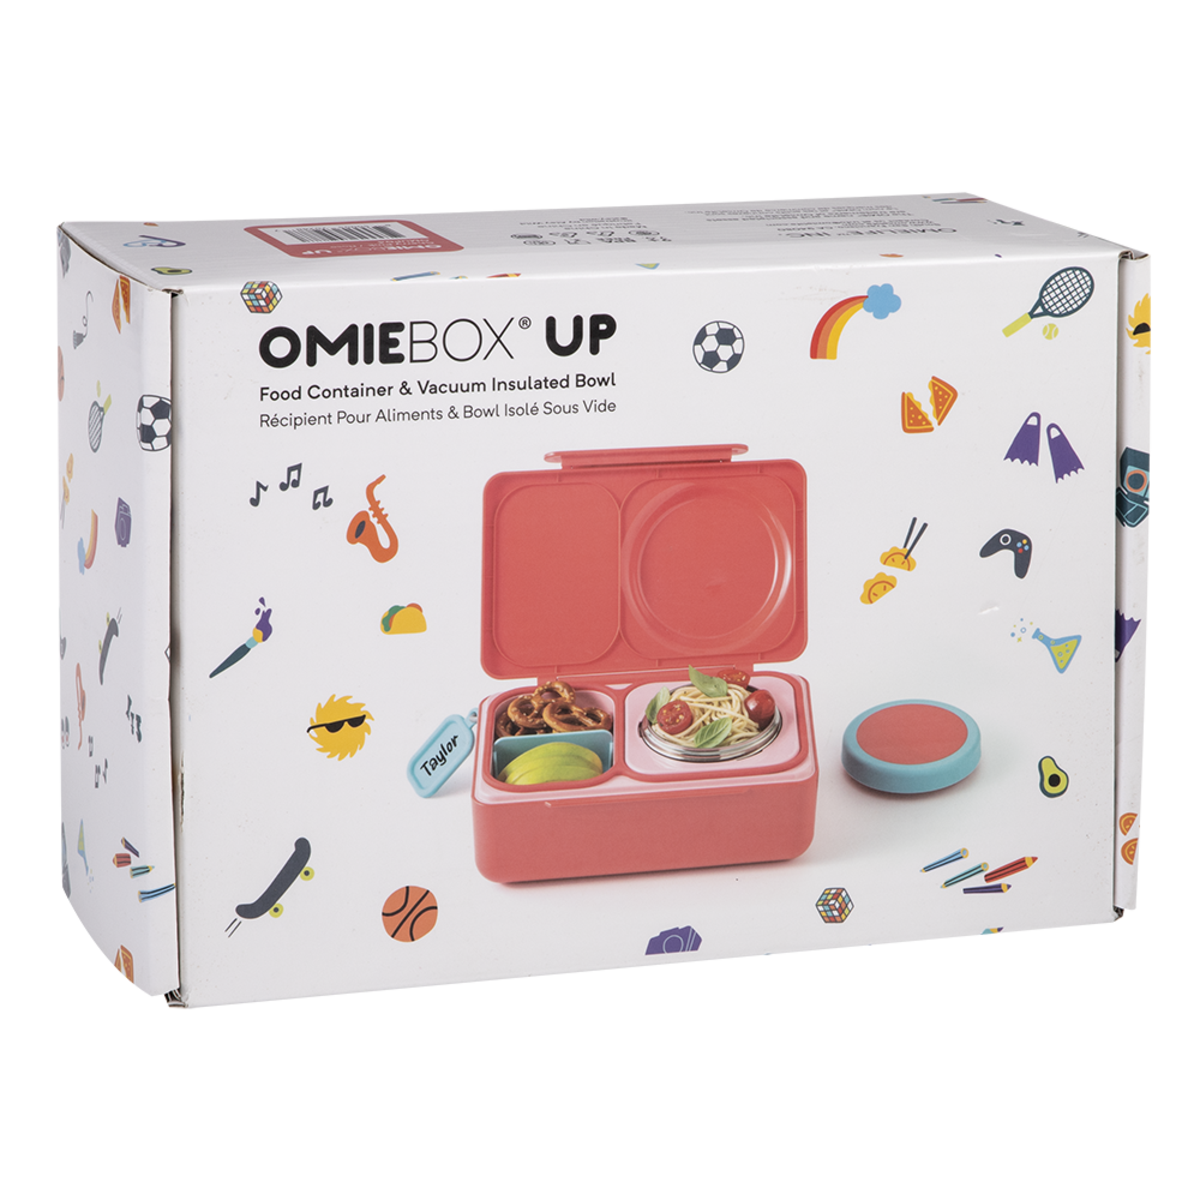 OmieBox UP Hot & Cold Bento Box in Cherry Pink